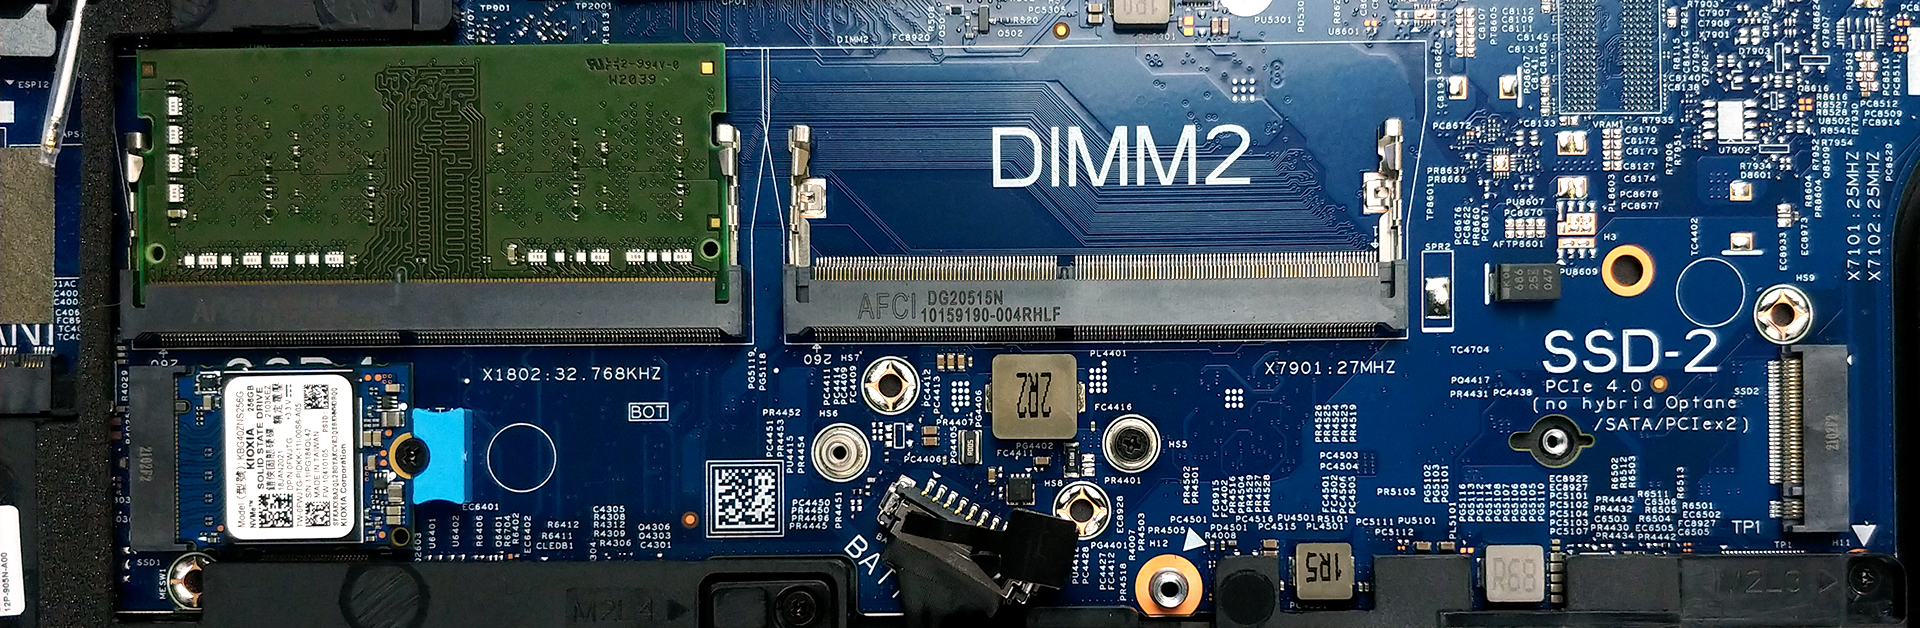 Inside Dell Latitude 15 5520 - disassembly and upgrade options |  